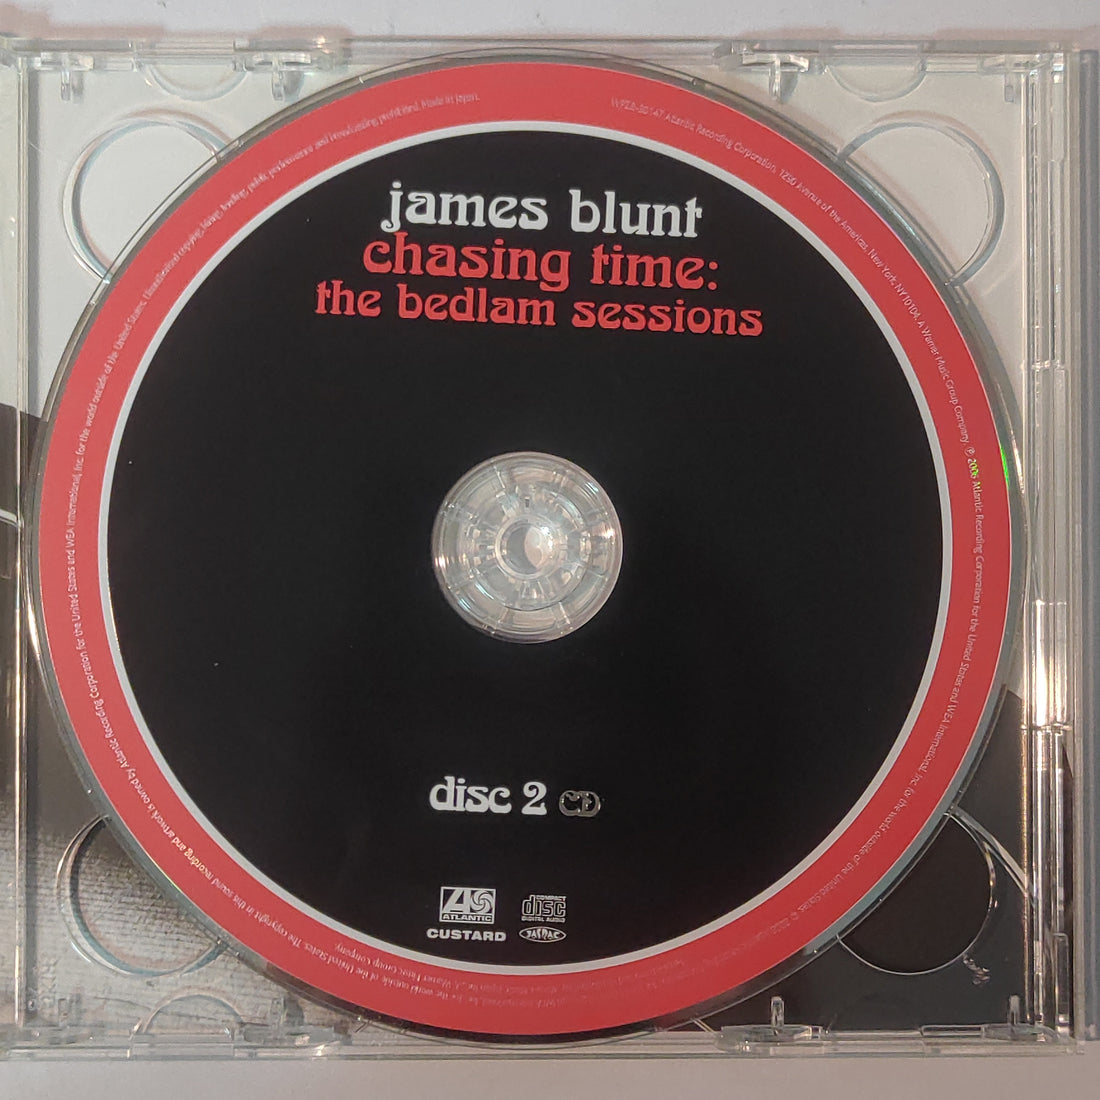 James Blunt - Chasing Time: The Bedlam Sessions (CD) (VG+)